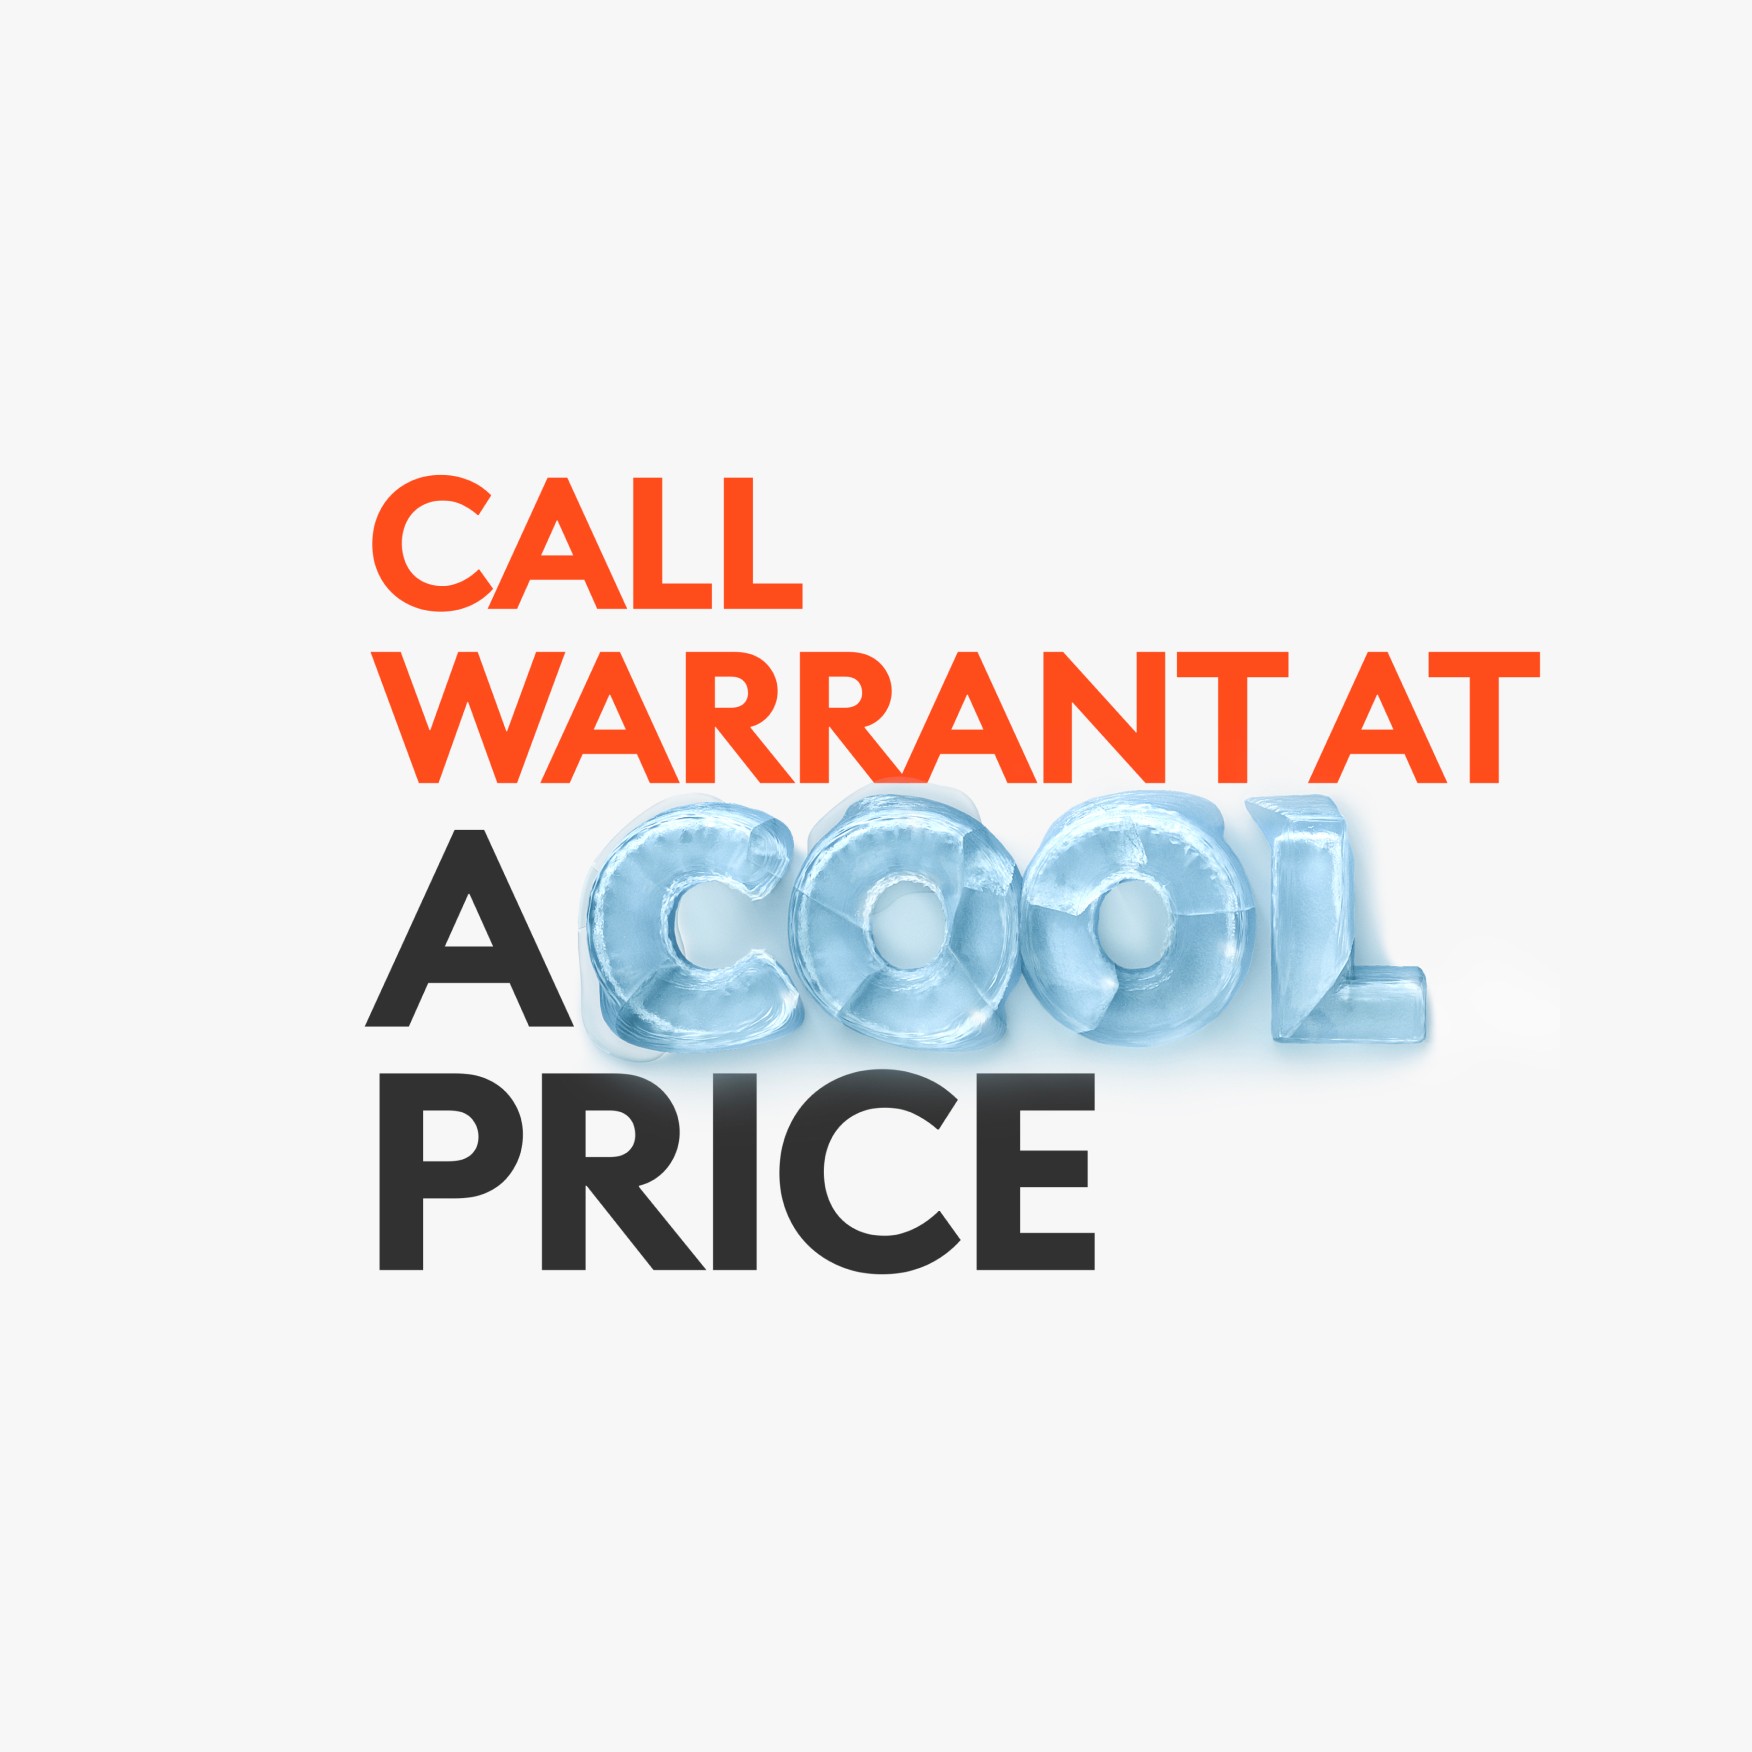 Call warrant at a cool price 